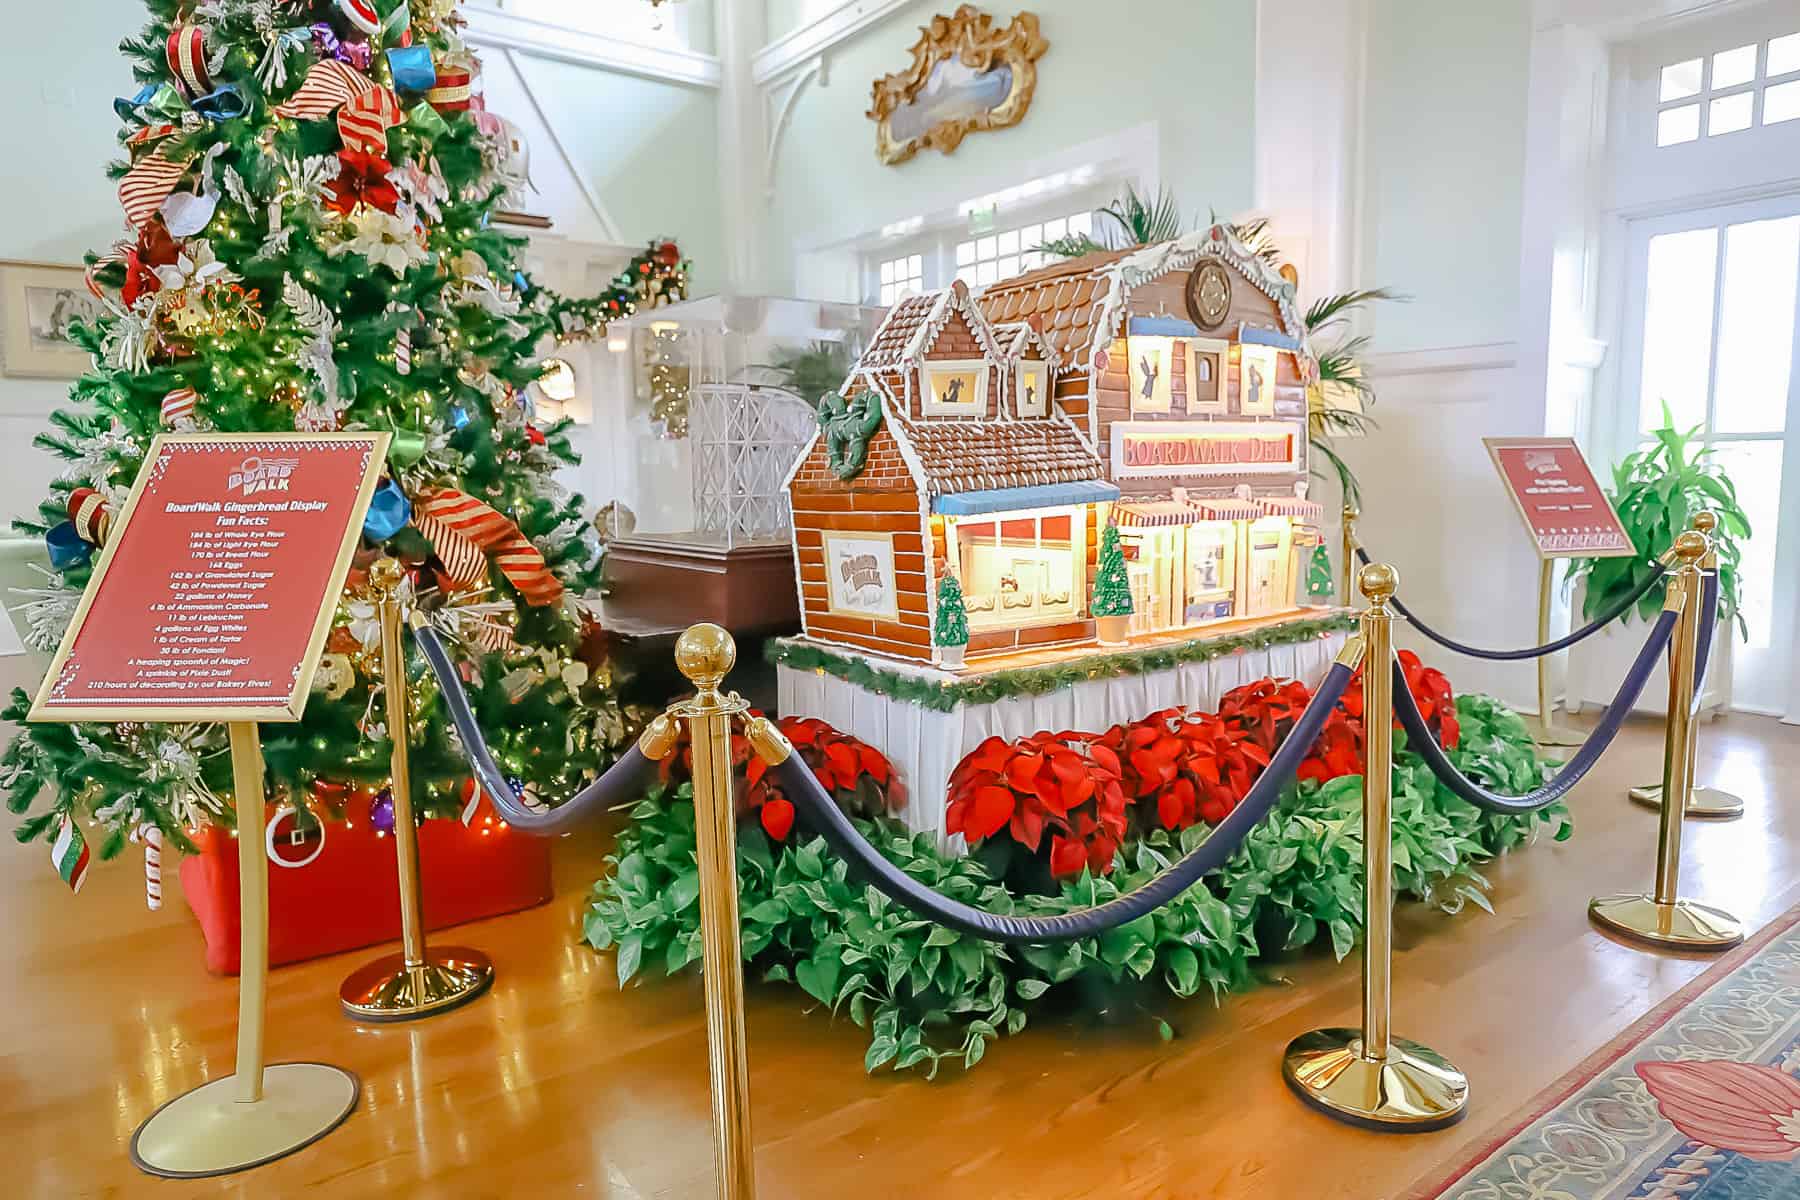 shows the entire view of the gingerbread display with signage 